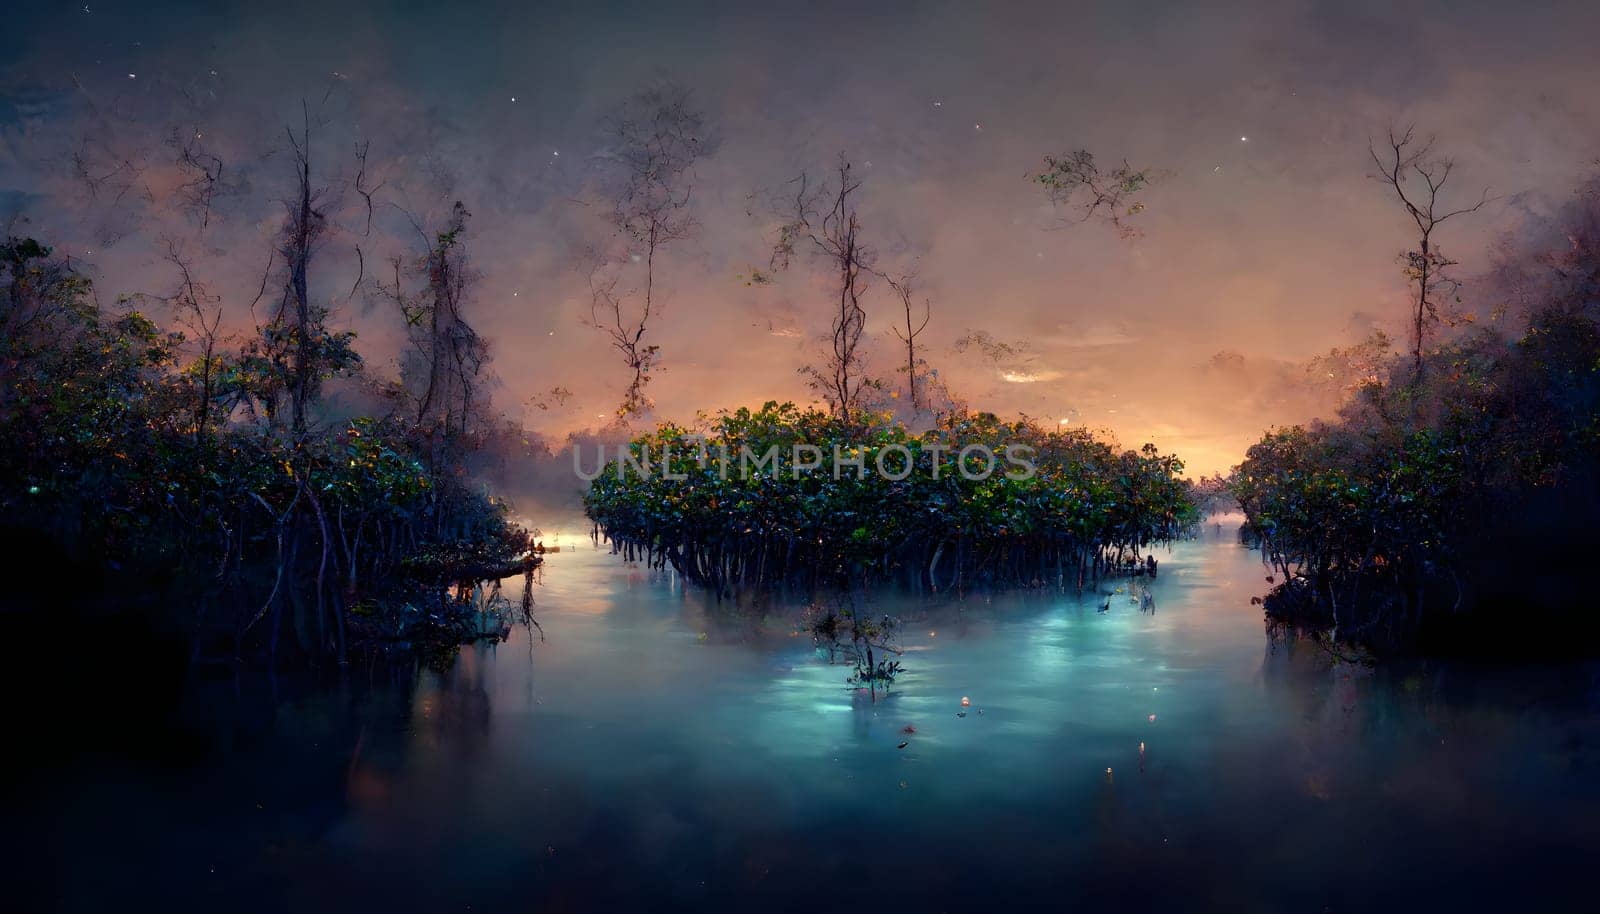 mangroves on the banks of the river at night, neural network generated art by z1b